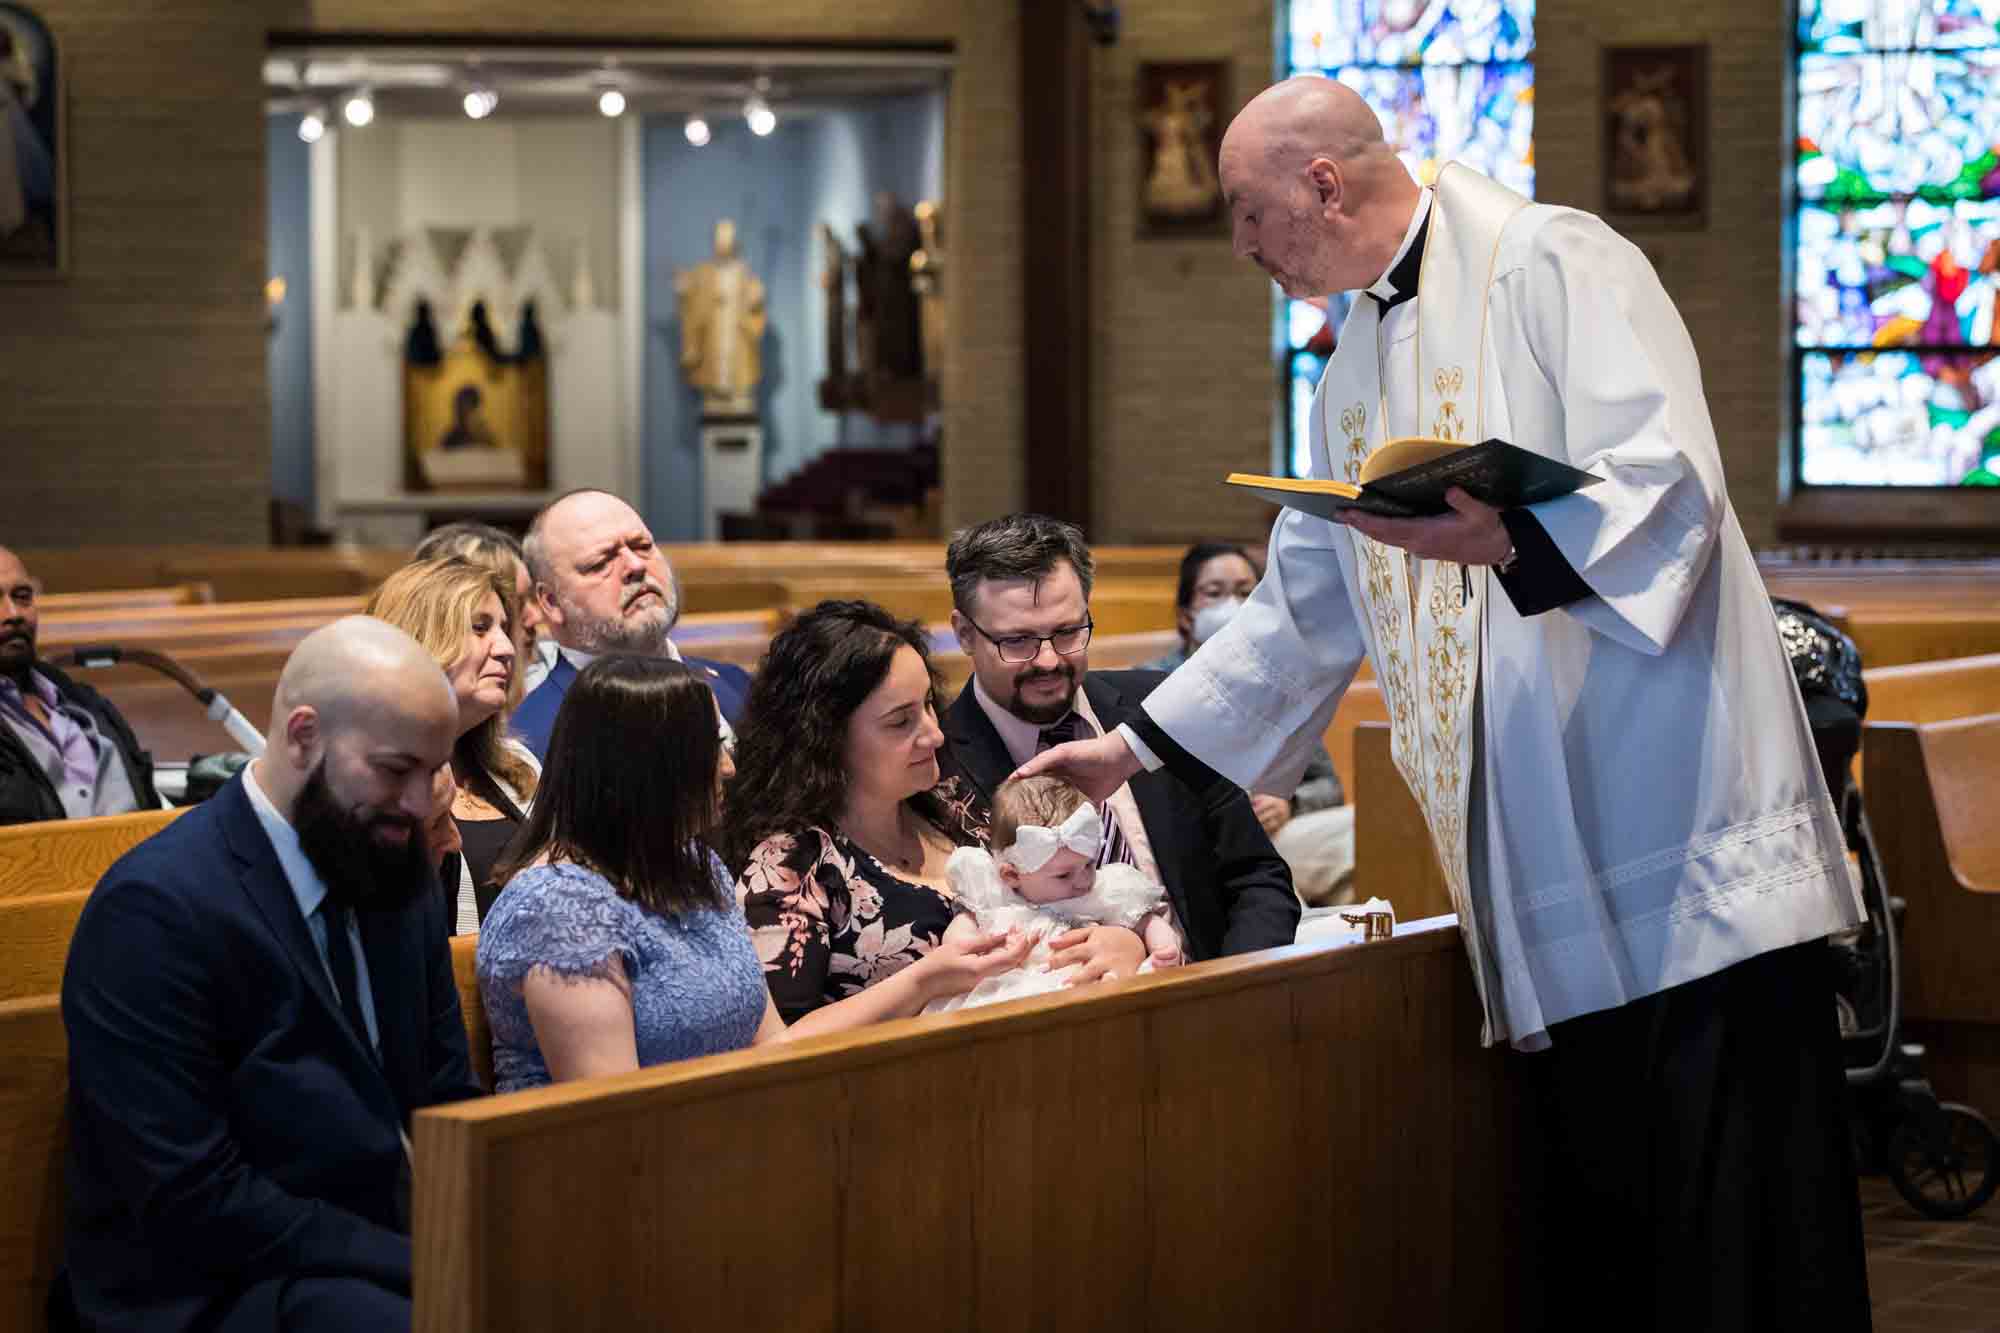 Maspeth baptism photos of priest anointing baby's head with oil in front of family